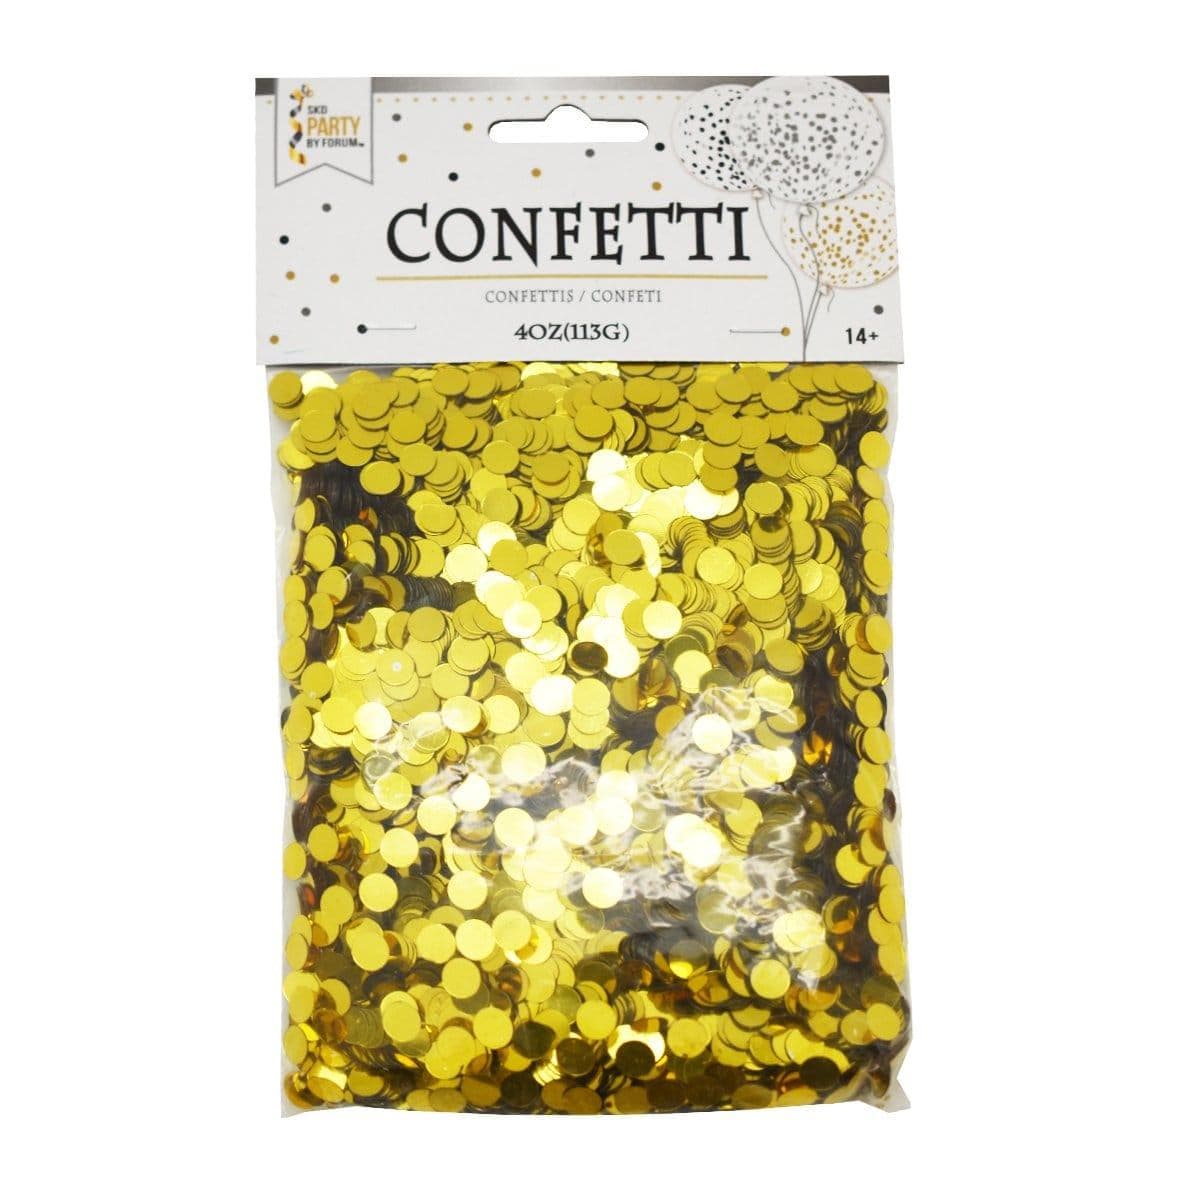 Buy Decorations Dot Confetti 4 Oz. - Gold sold at Party Expert